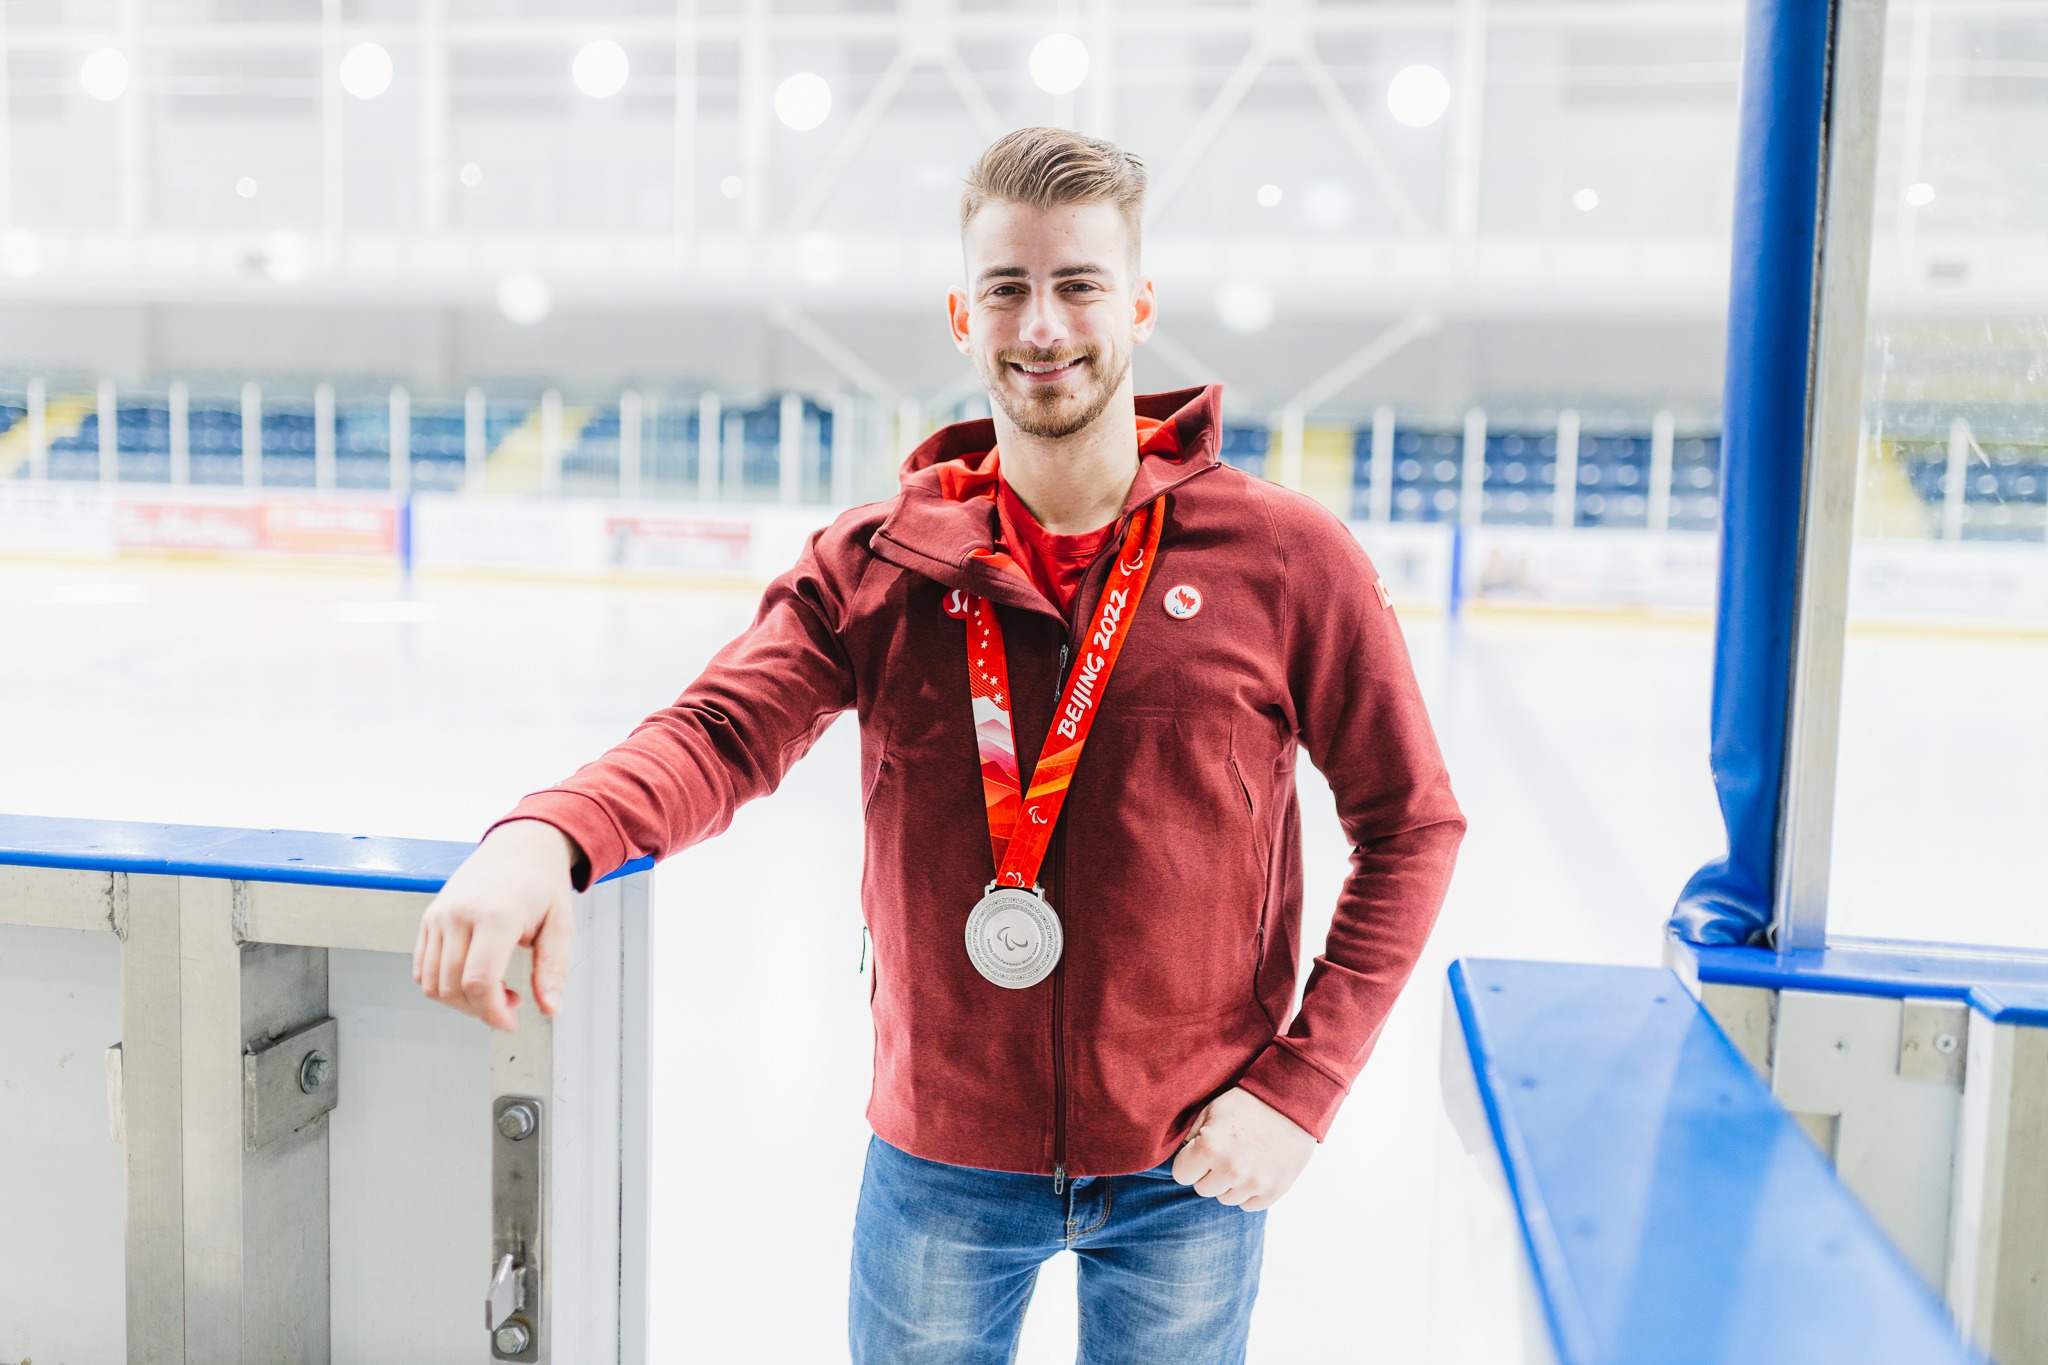 Young man stands at the entry way of an indoor ice pad wearing a red jacket and silver medal around his neck